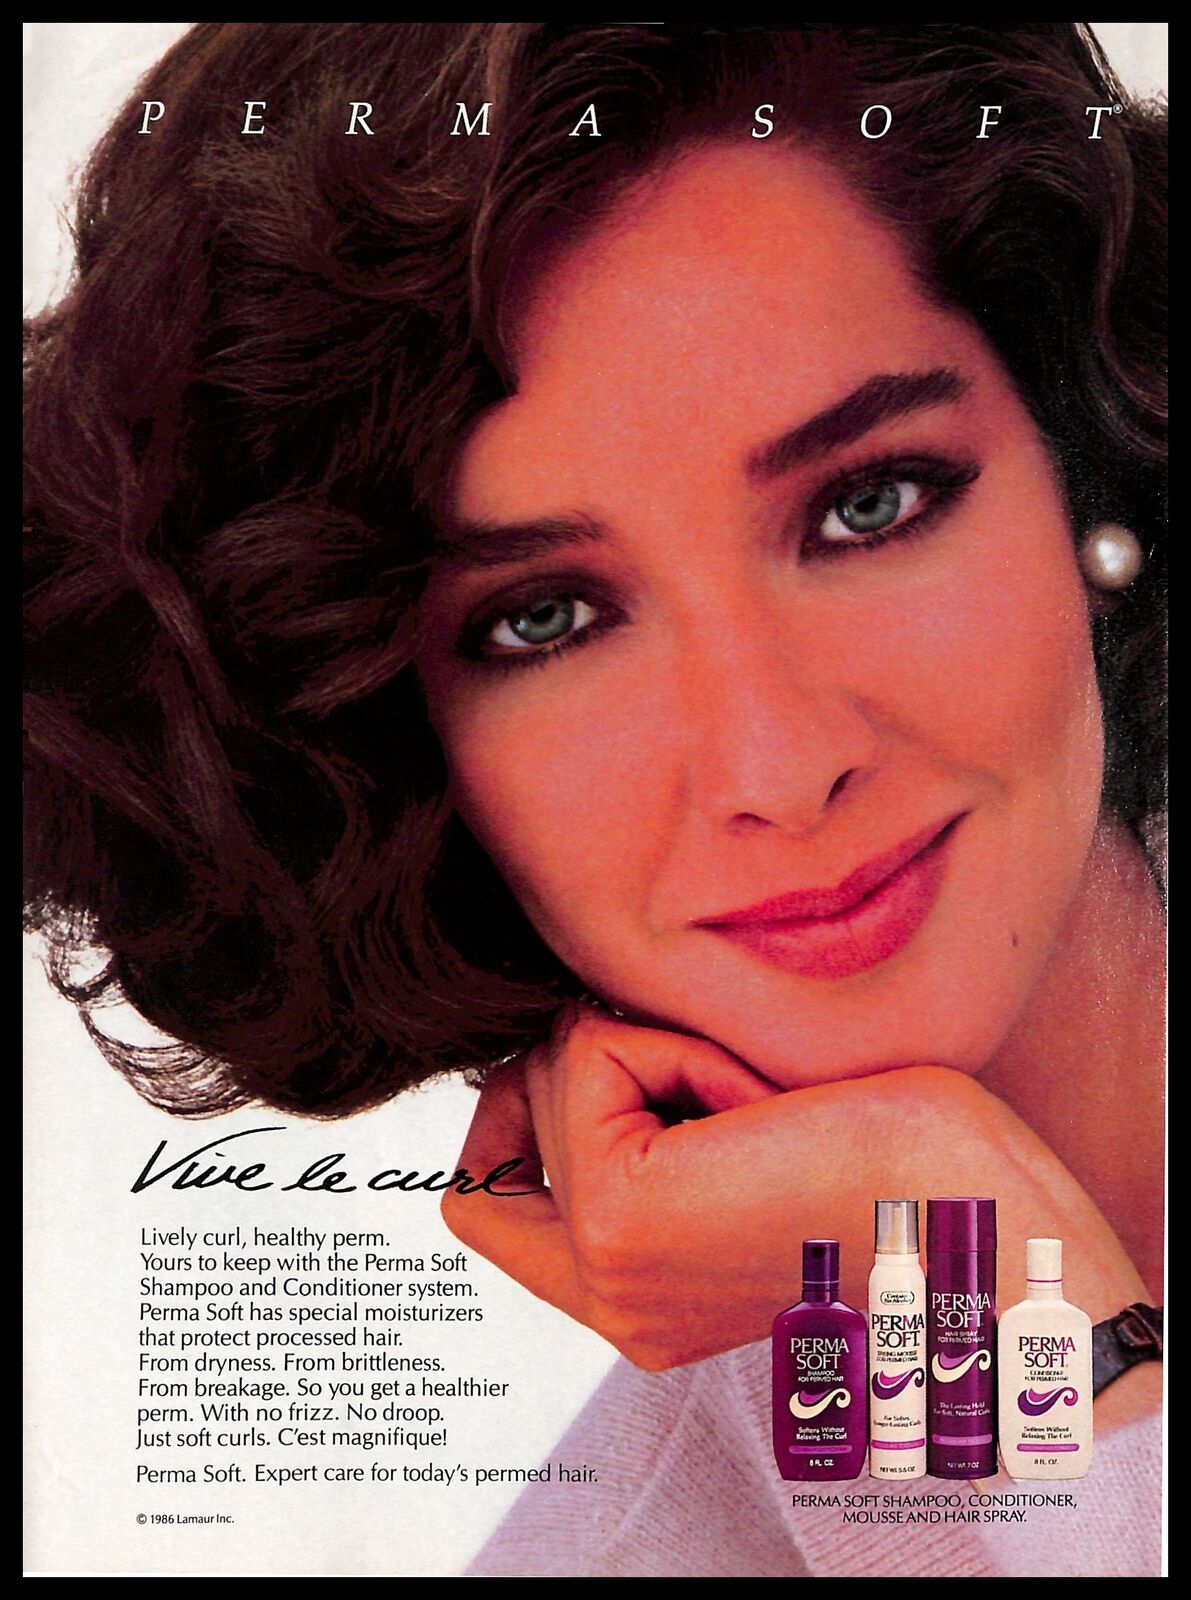 1987 Perma Soft Shampoo Vintage PRINT ADVERTISEMENT Haircare Conditioner Curly 